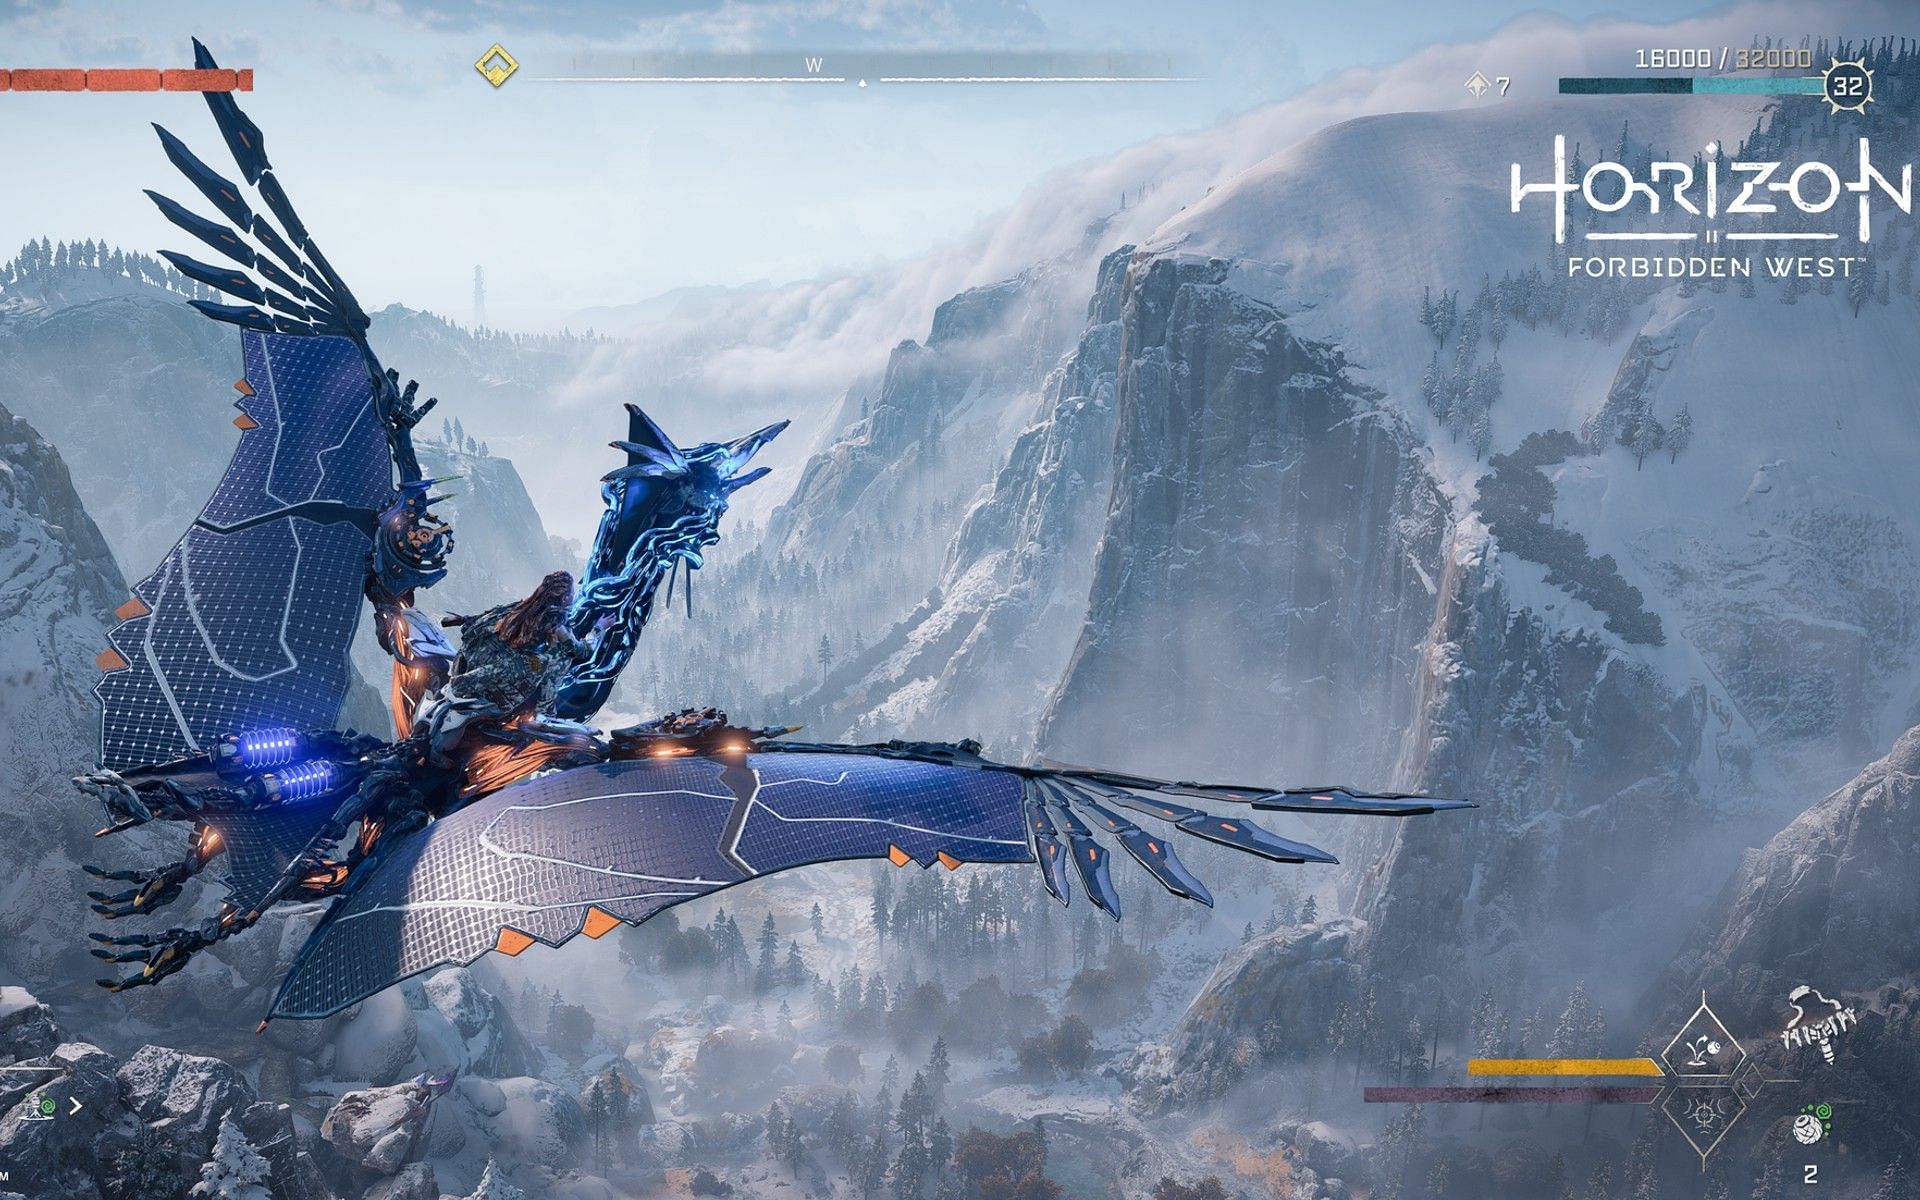 Flying or gliding is just one part of the progression in the game. (Image via Horizon Forbidden West)